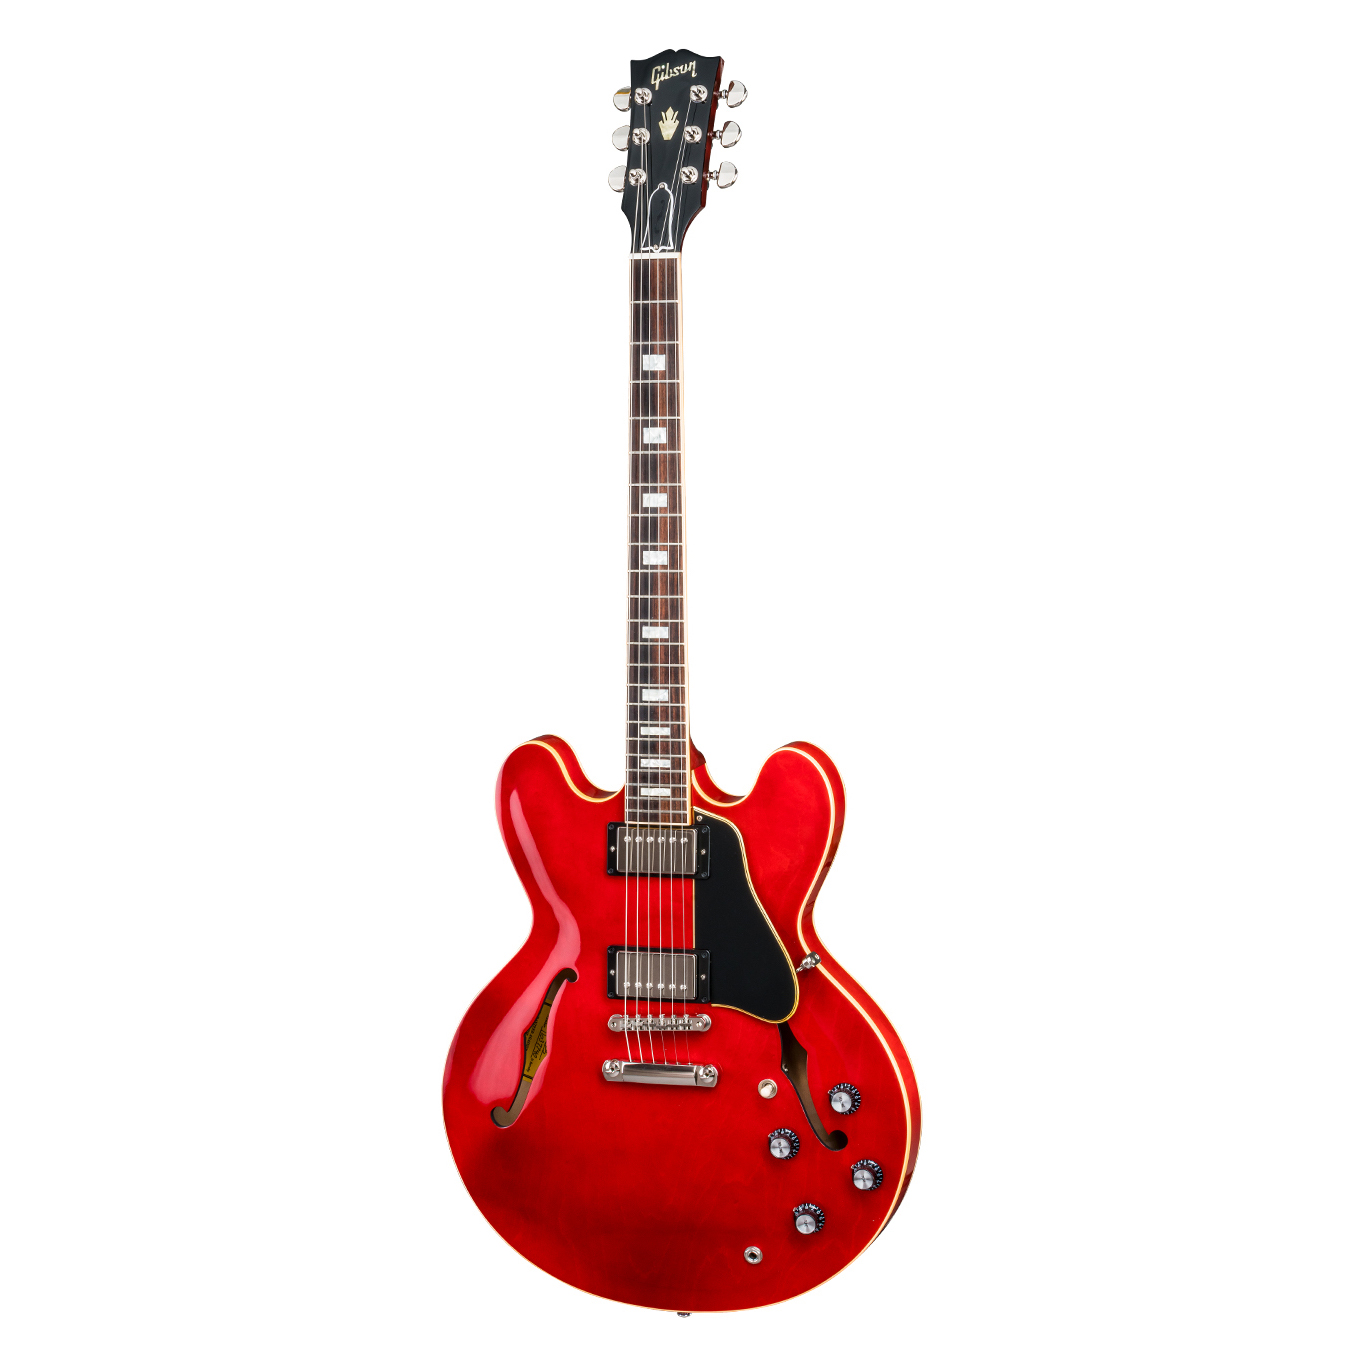 Gibson ES-335 Traditional Antique Faded Cherry (2018) - Guitar Compare